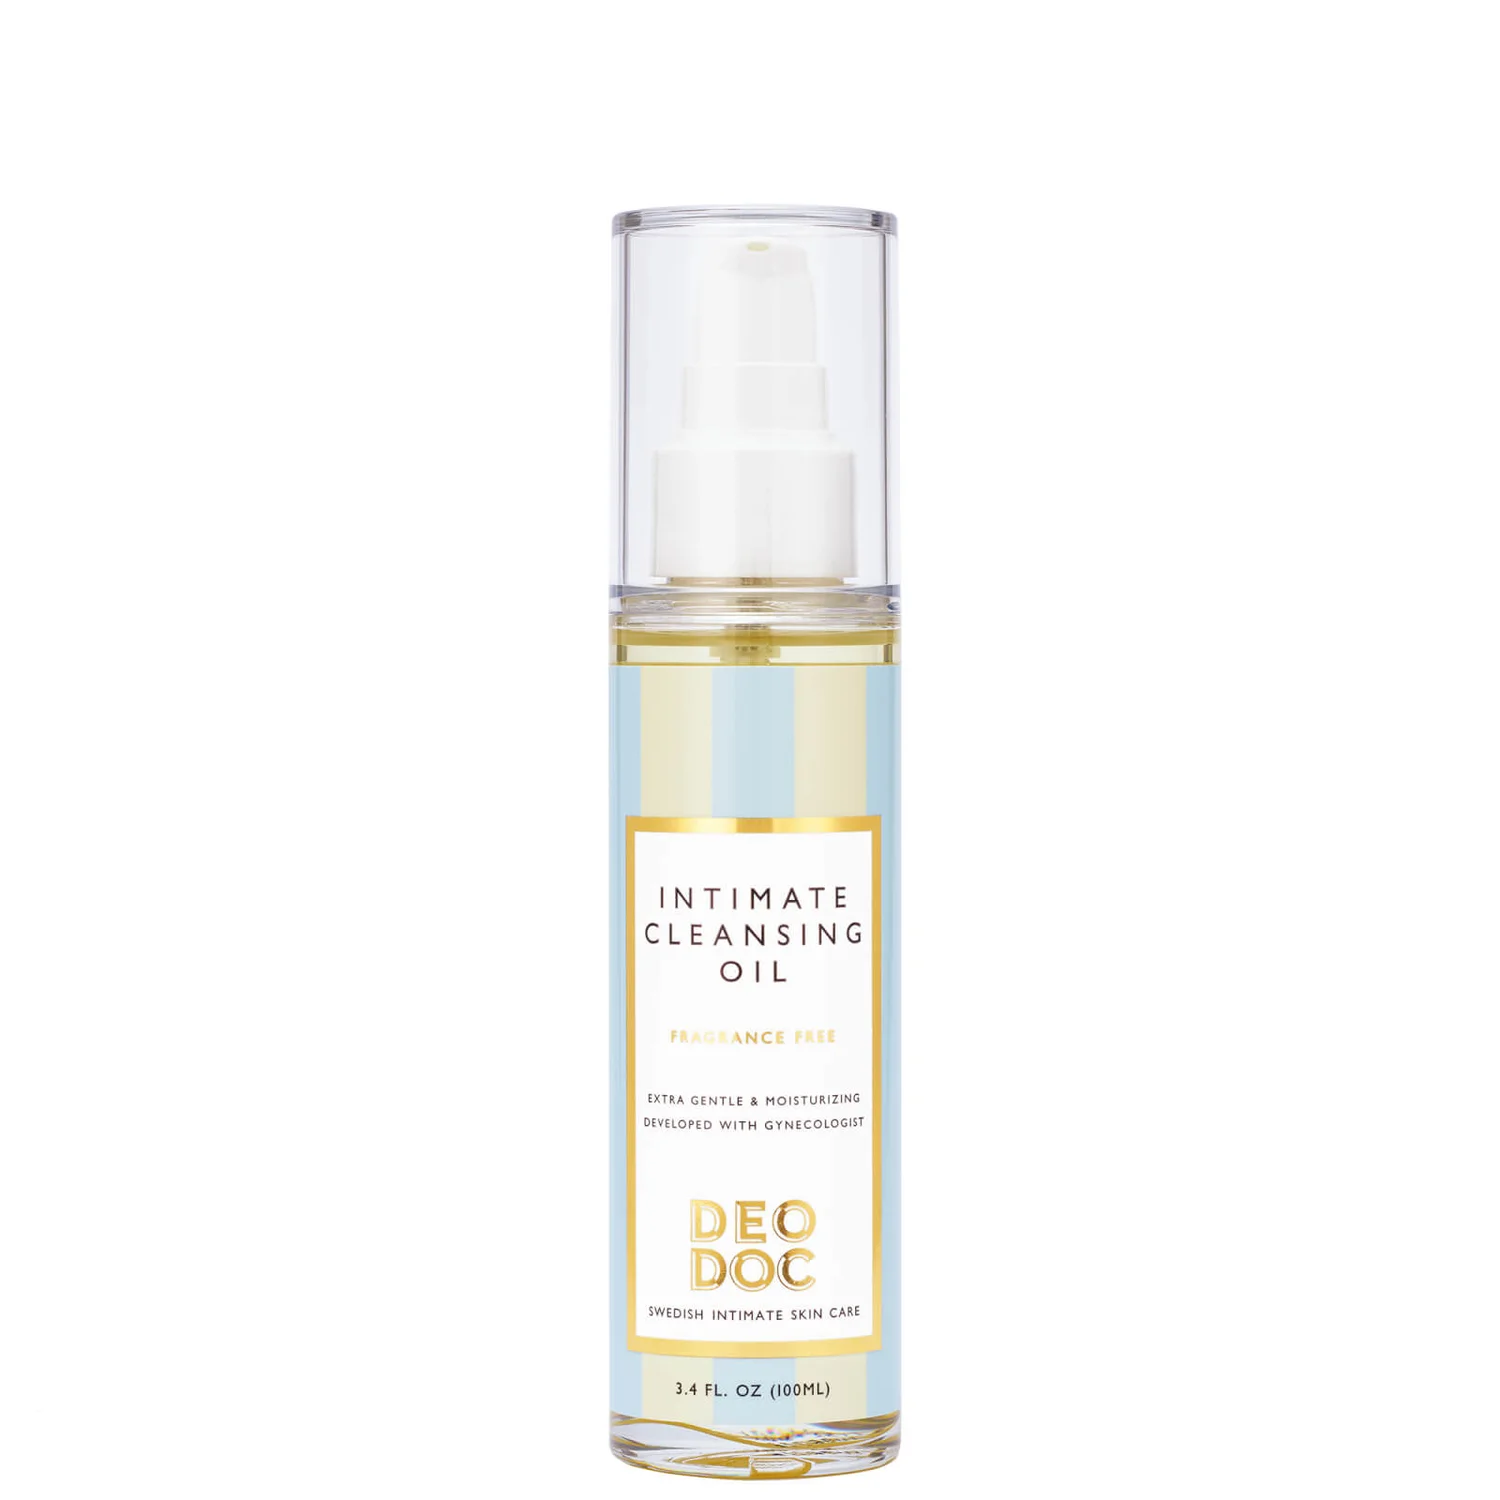 cultbeauty.co.uk | Deodoc Intimate Cleansing Oil